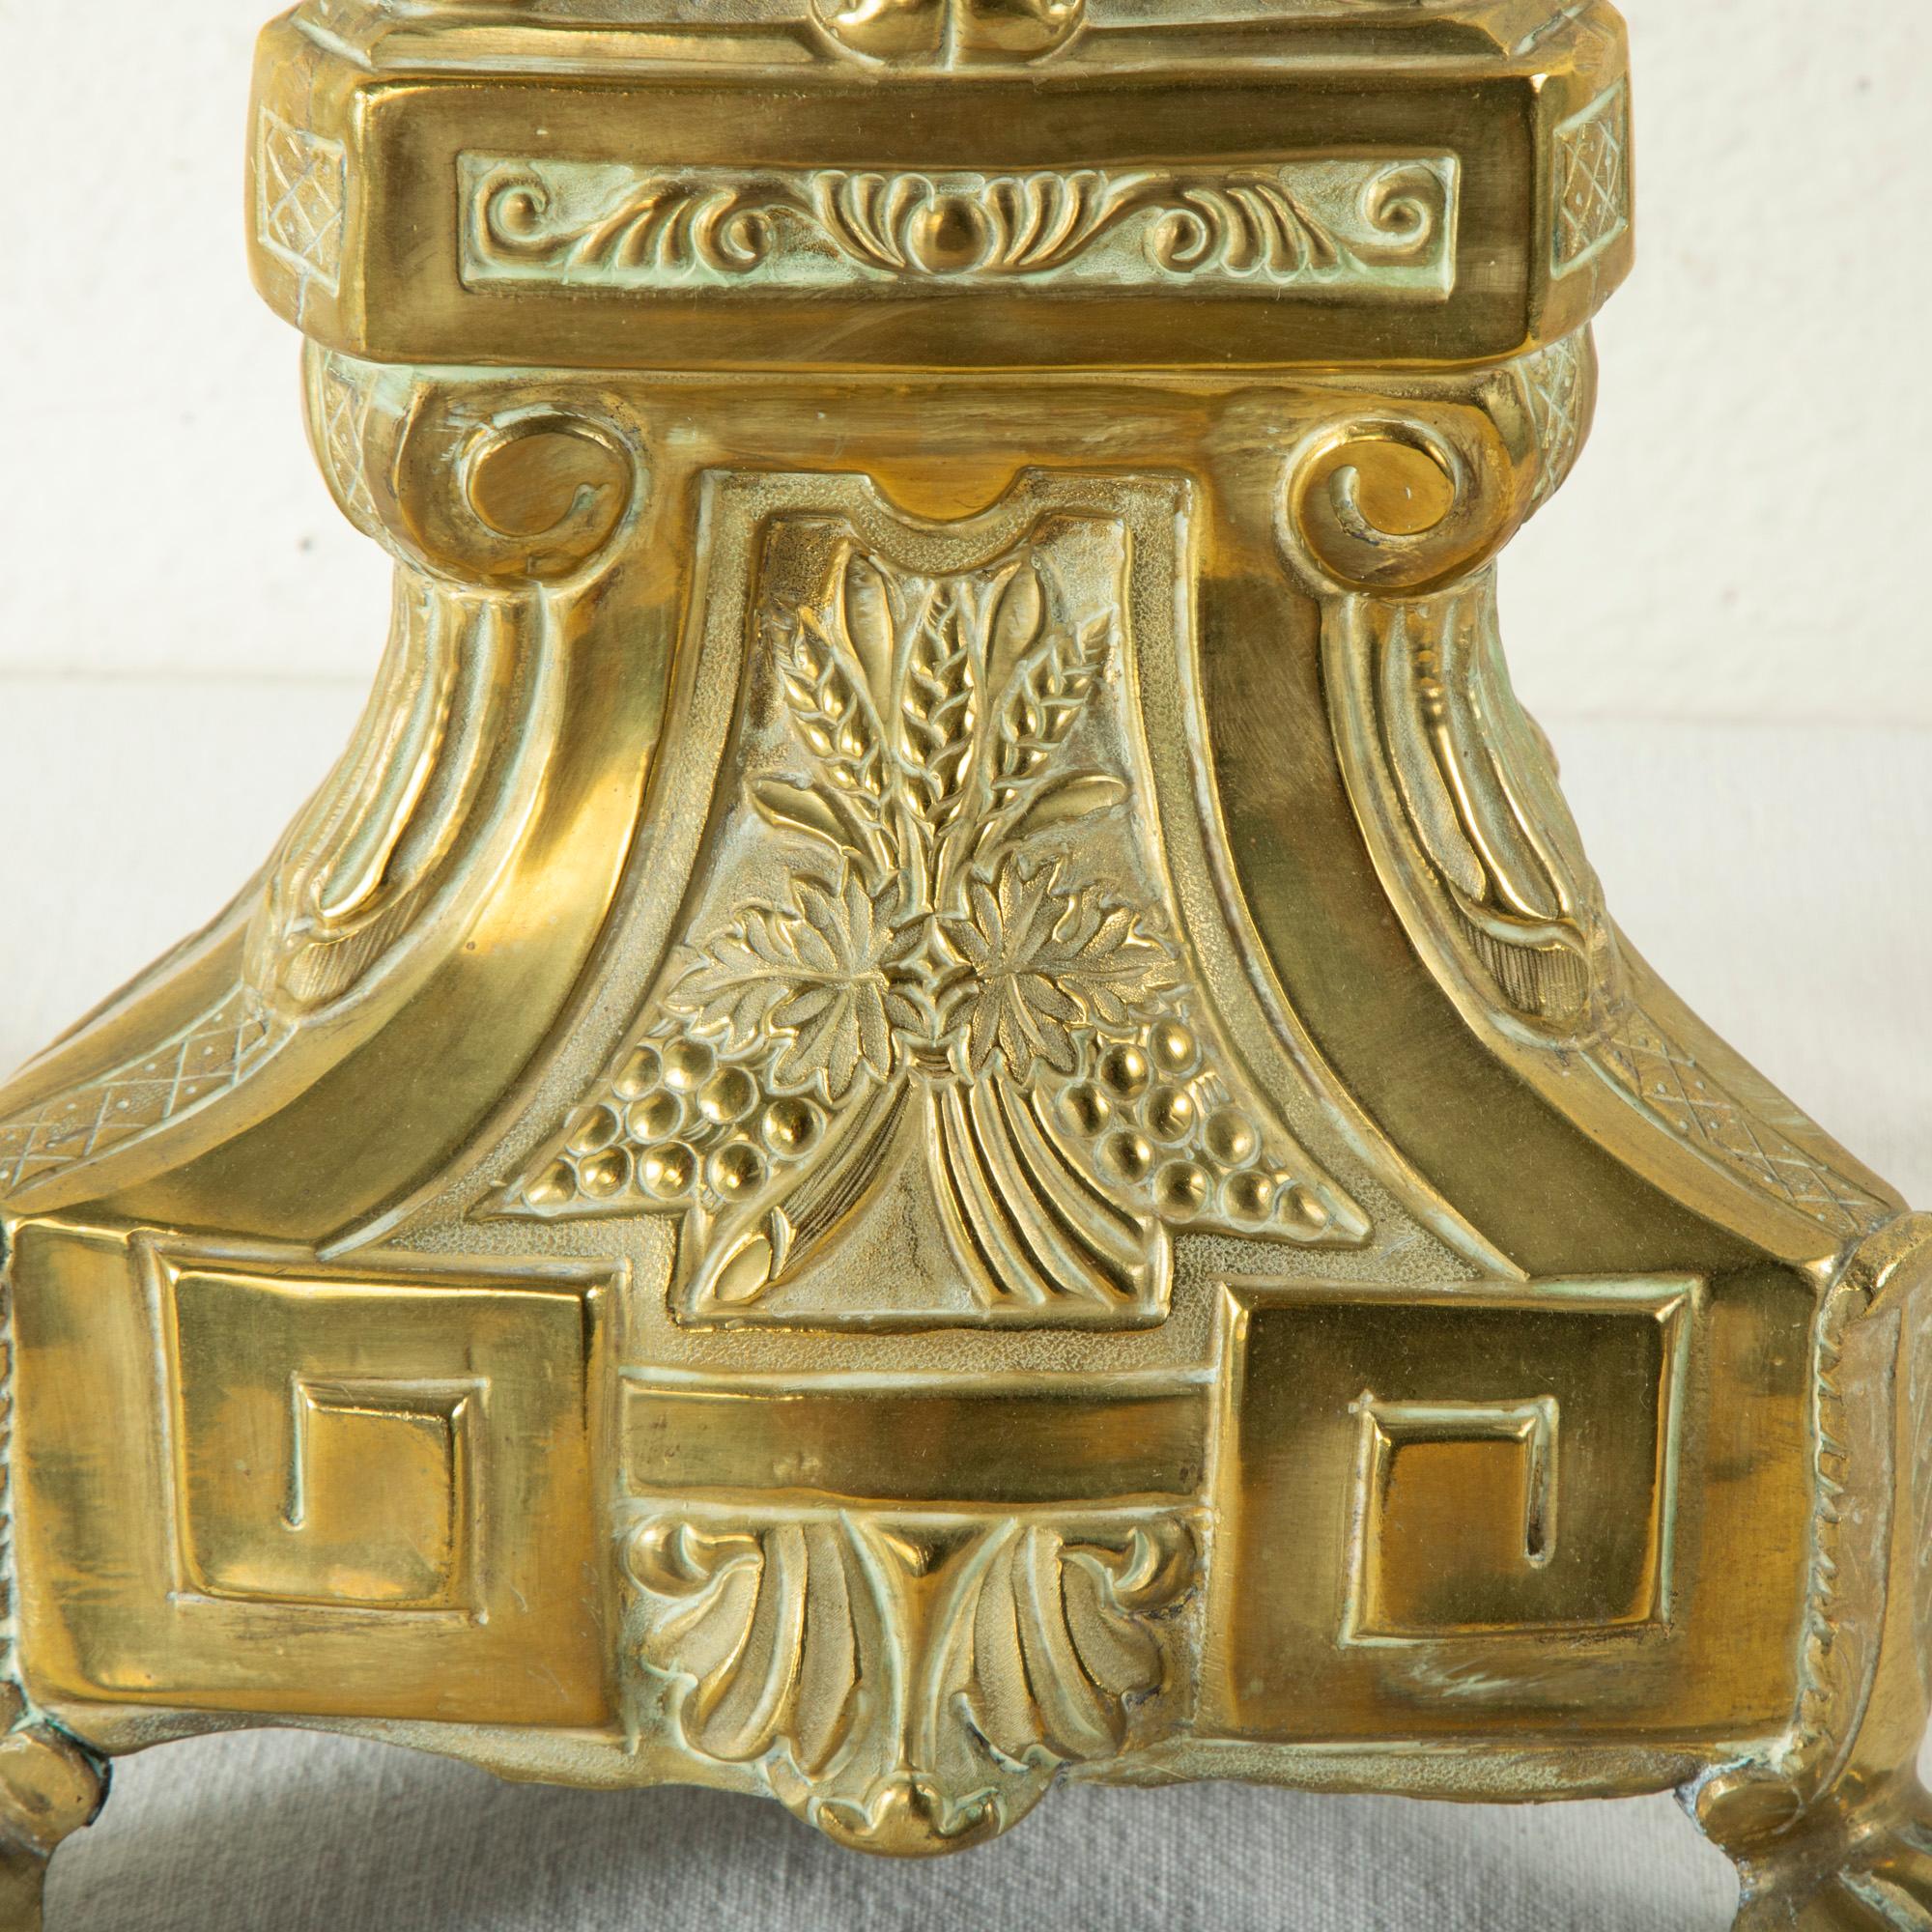 Tall Late 19th Century Brass Repousse Church Pricket, Candlestick For Sale 6